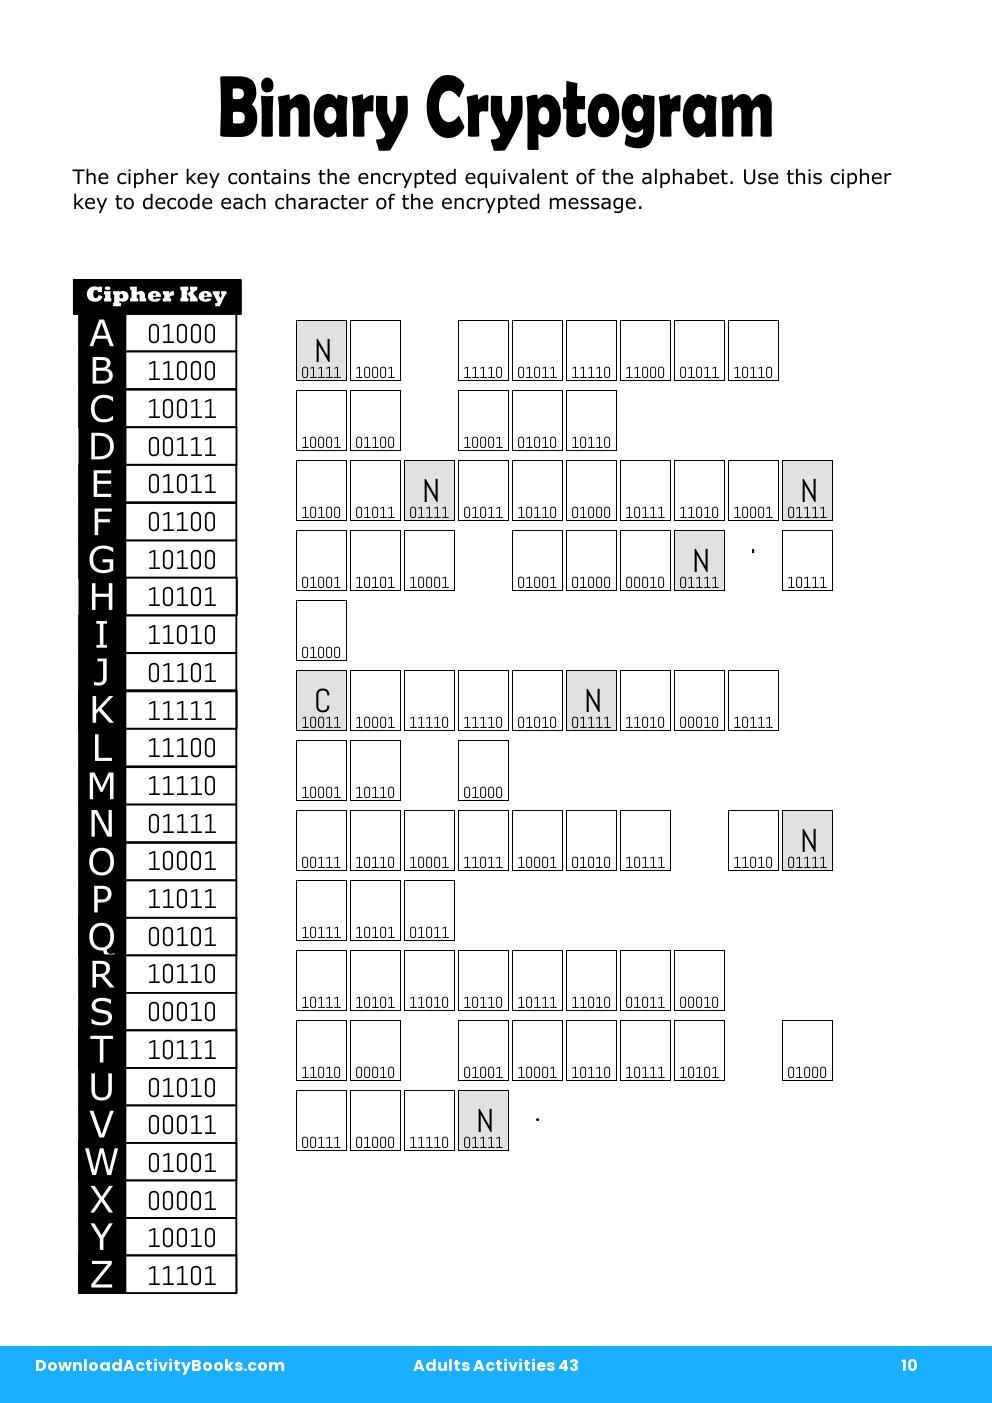 Binary Cryptogram in Adults Activities 43